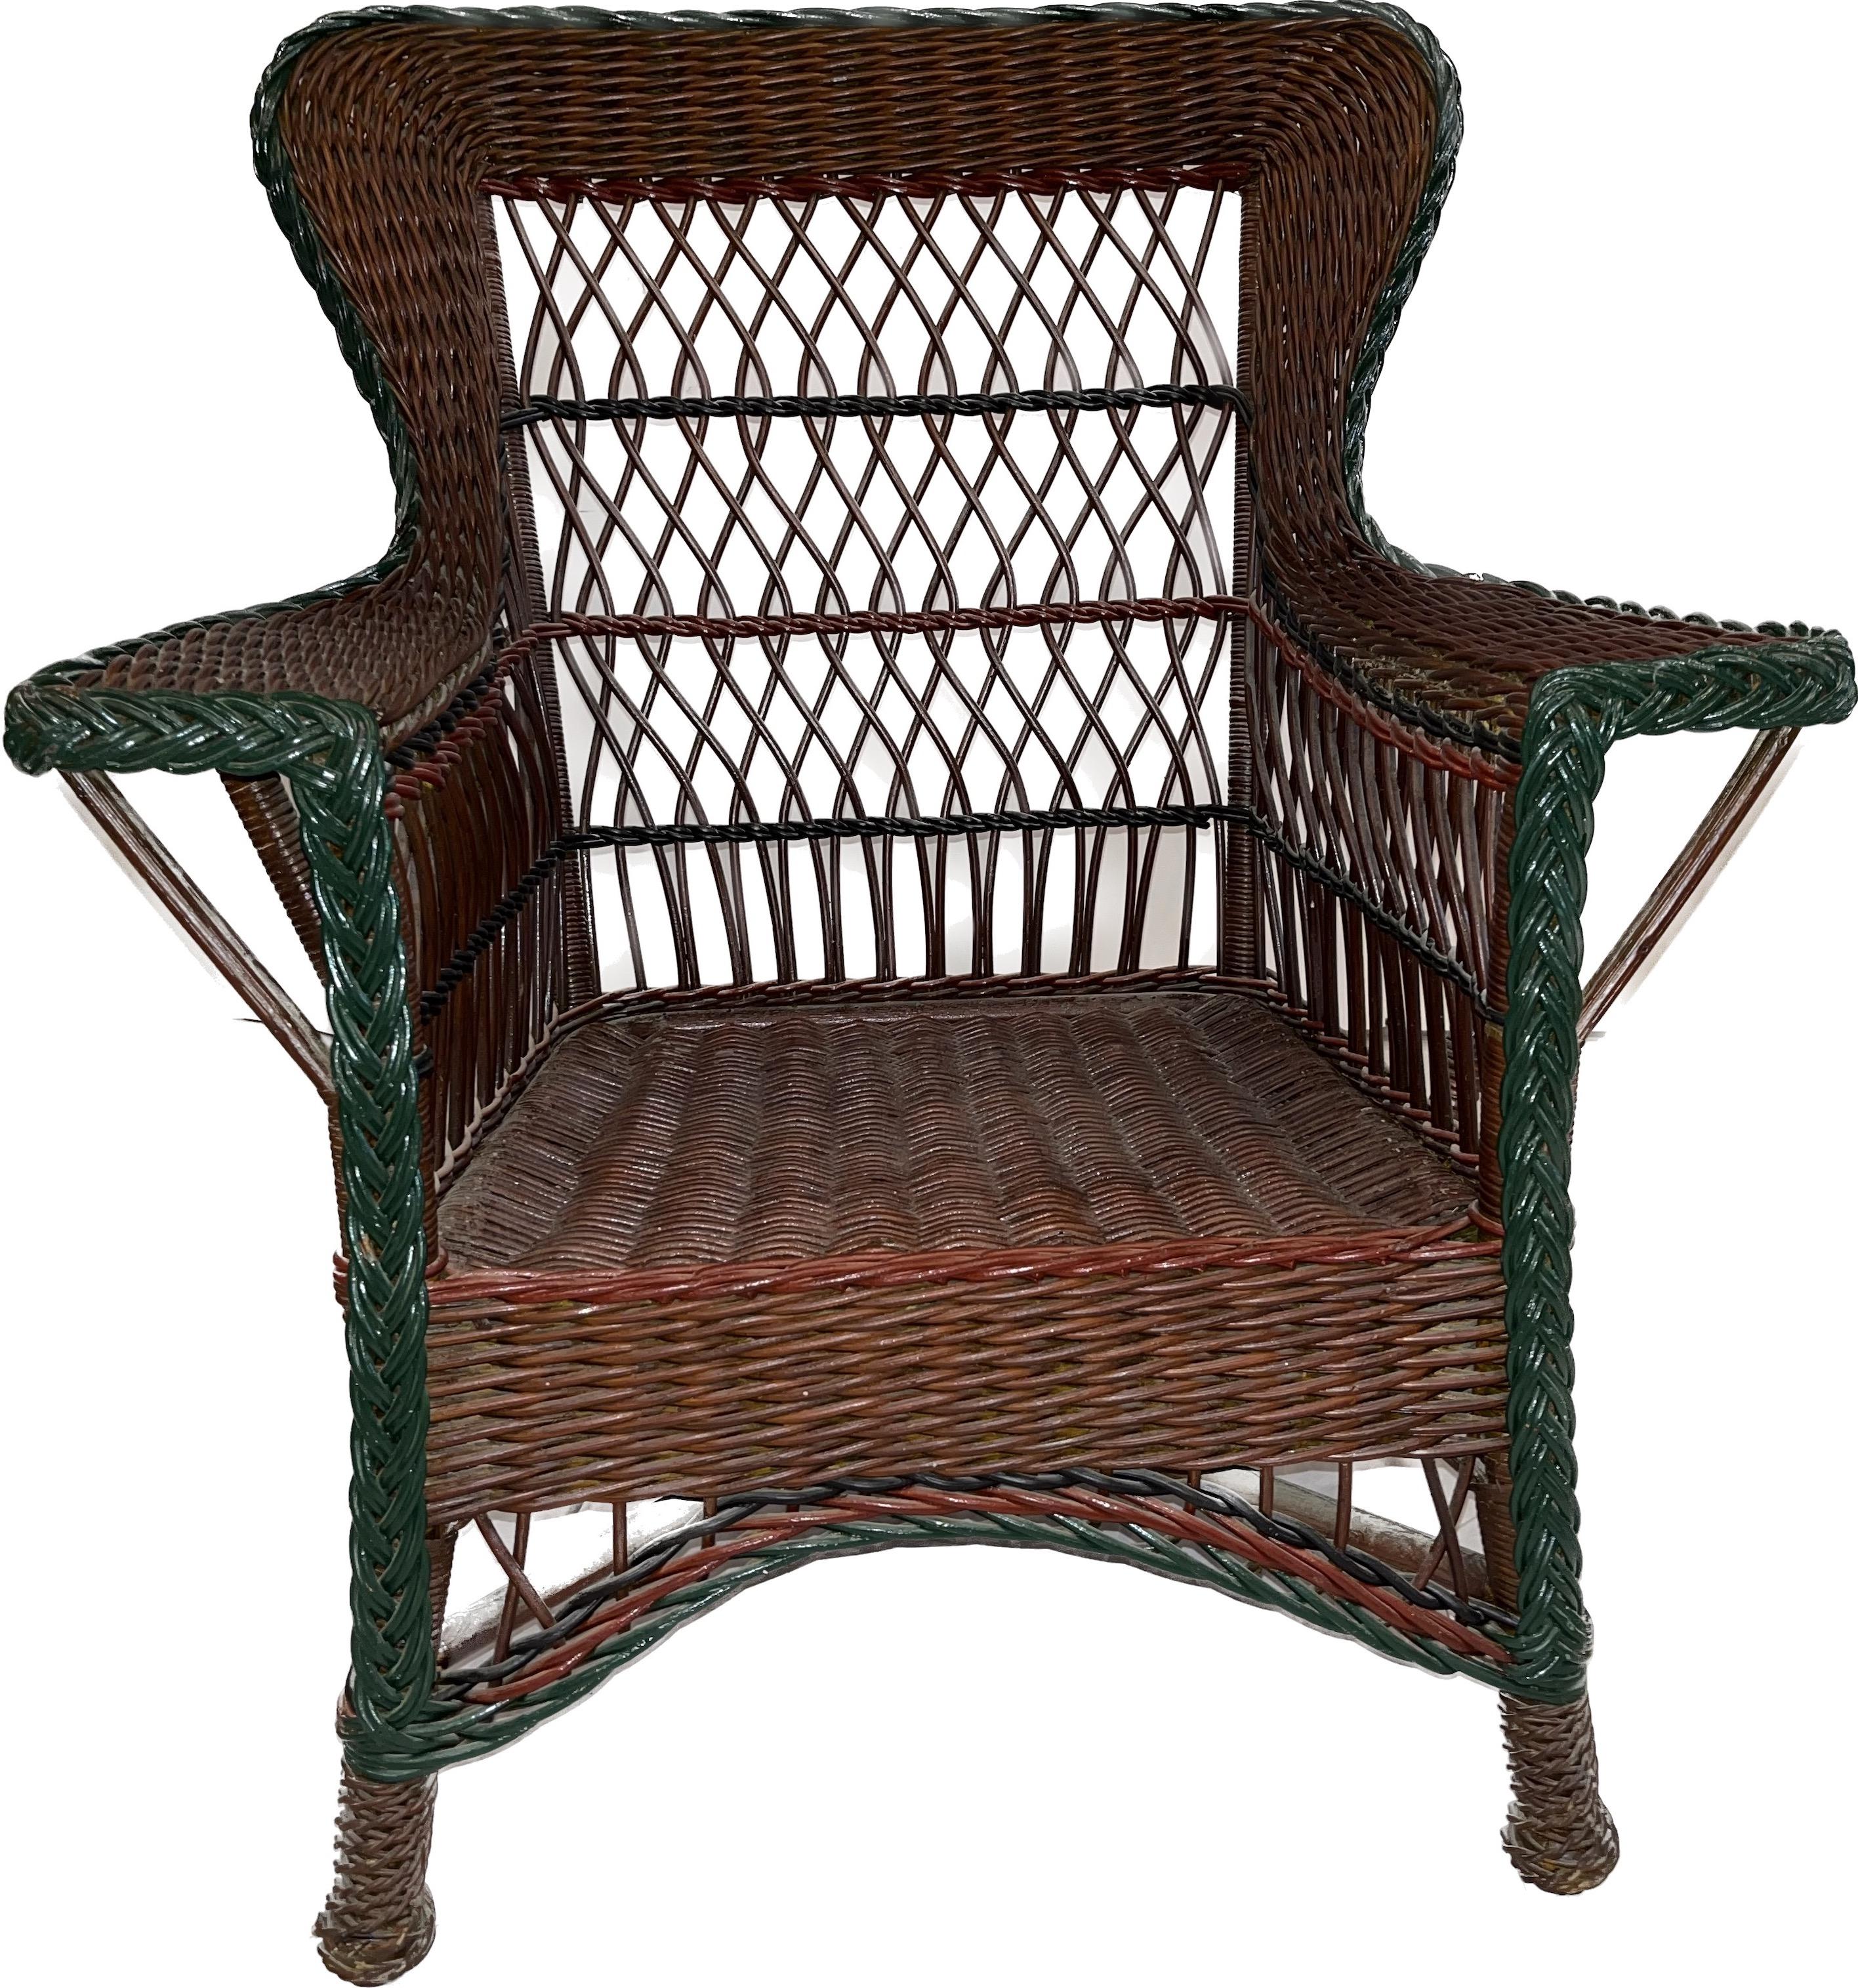 Antique Bar Harbor Style Wicker Wing Chair in Natural Finish with Green Trim 4